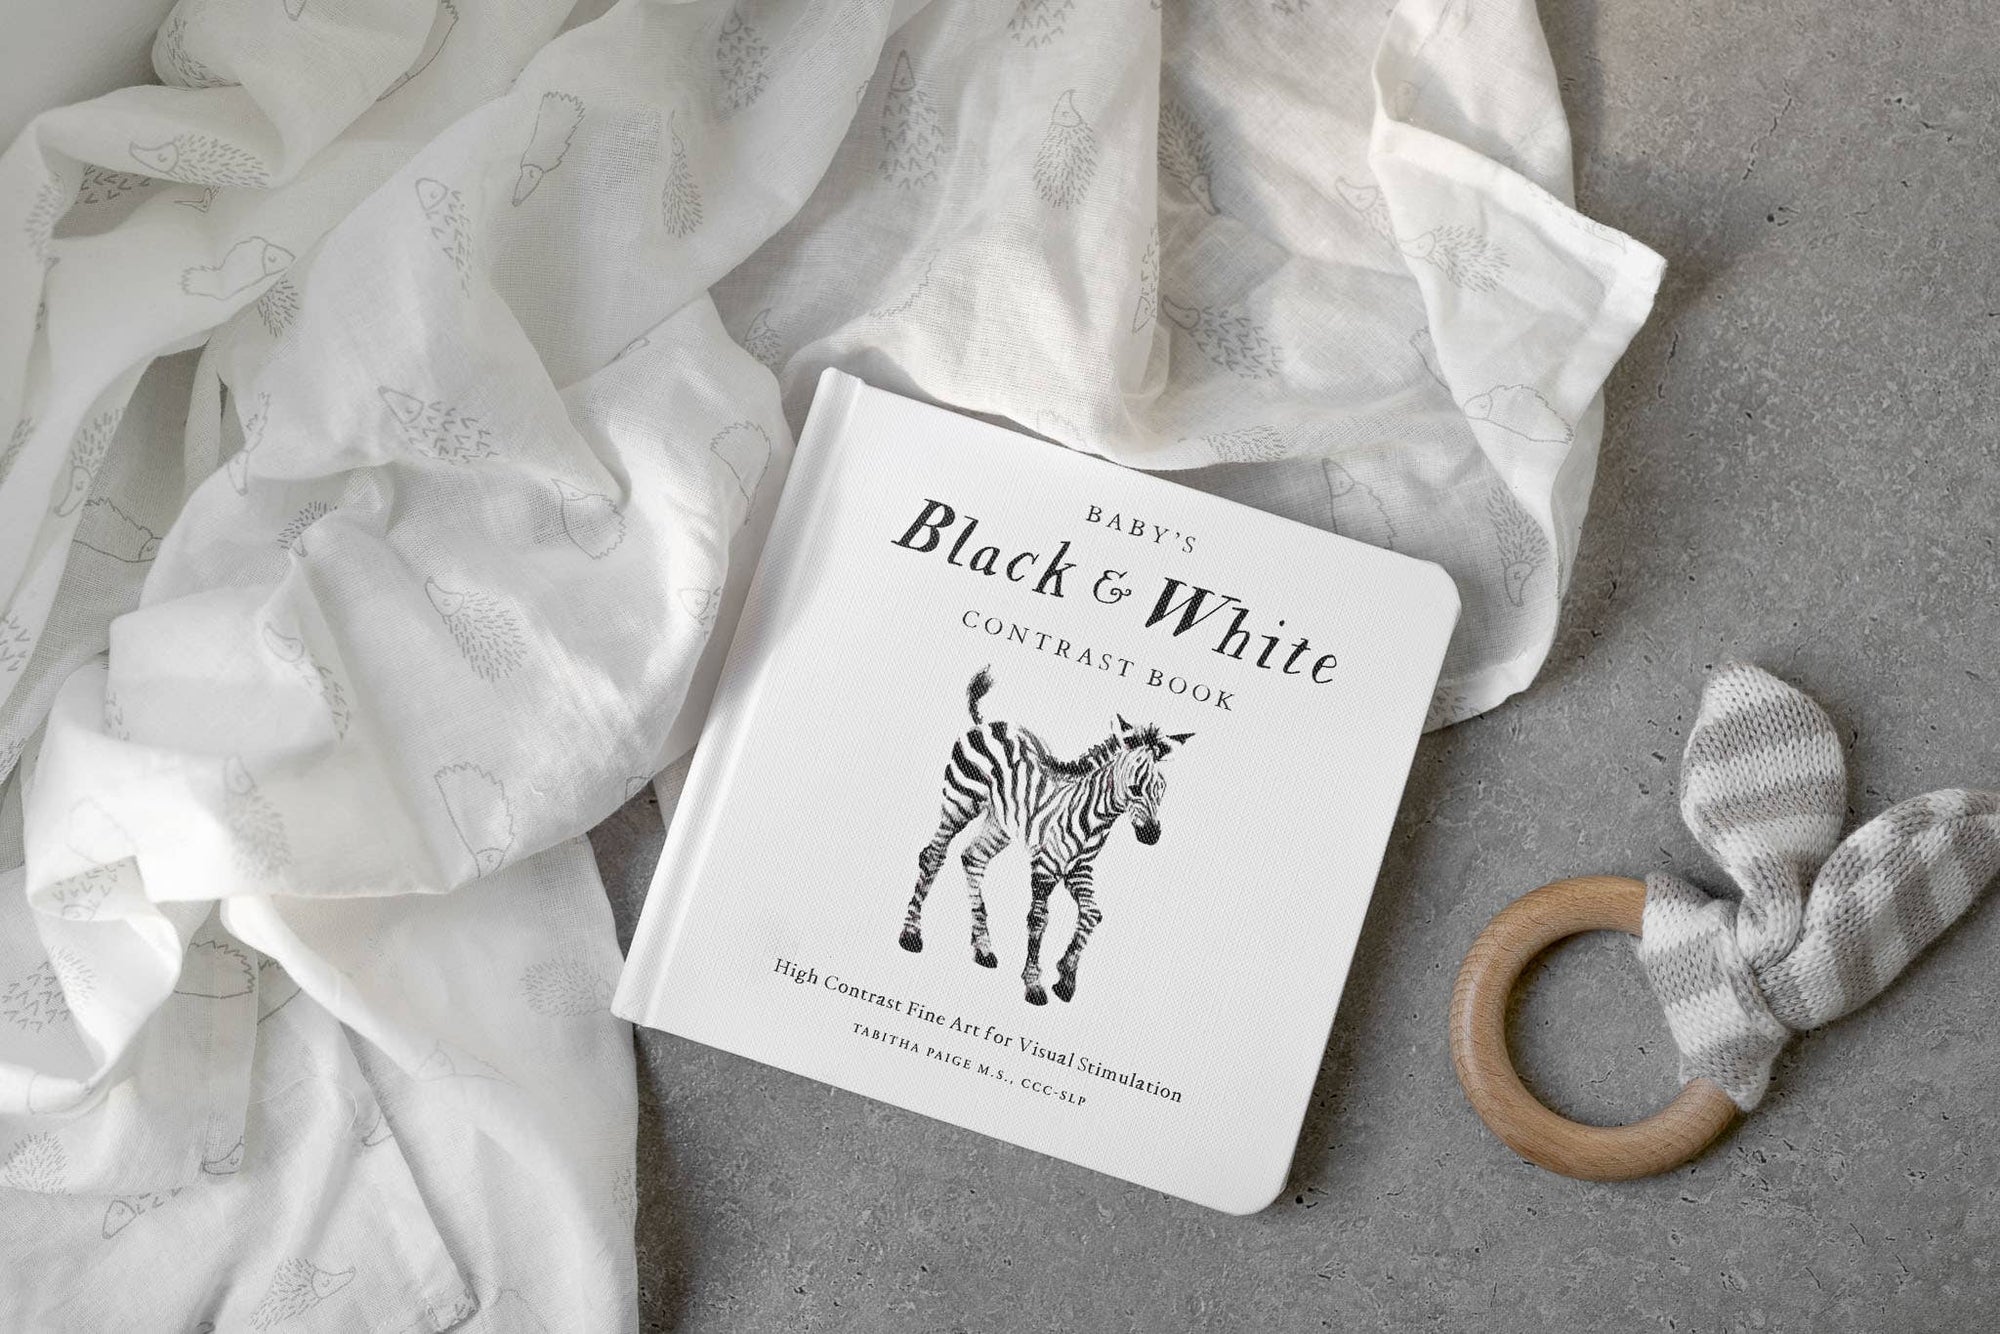 A visually stimulating Baby's Black and White Contrast Book featuring high-contrast images of a zebra and a teddy bear.